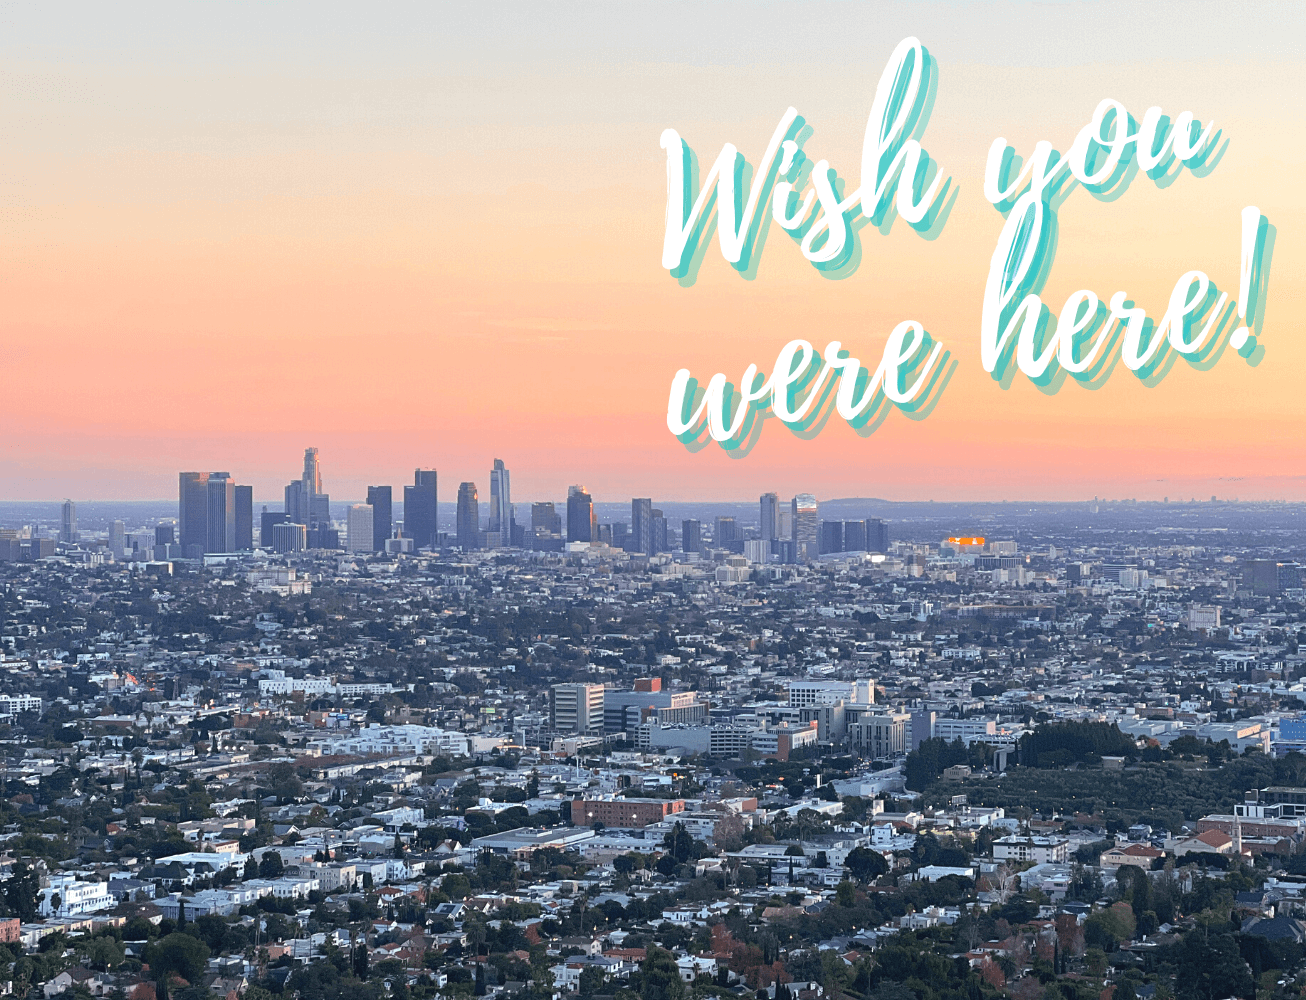 Los Angeles skyline at sunset with text that reads with you were here